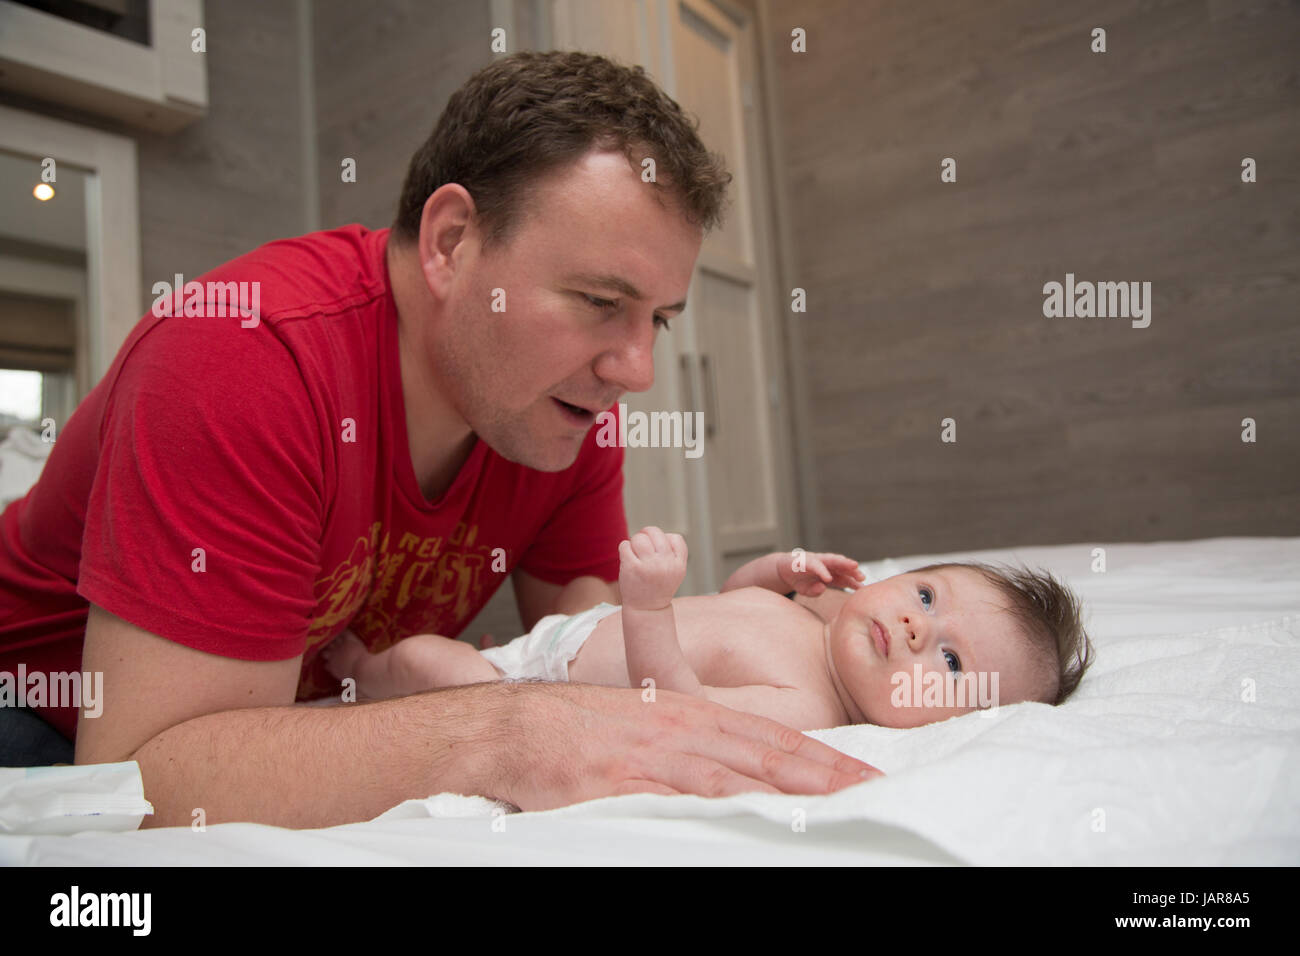 Dad soothing newborn baby Stock Photo